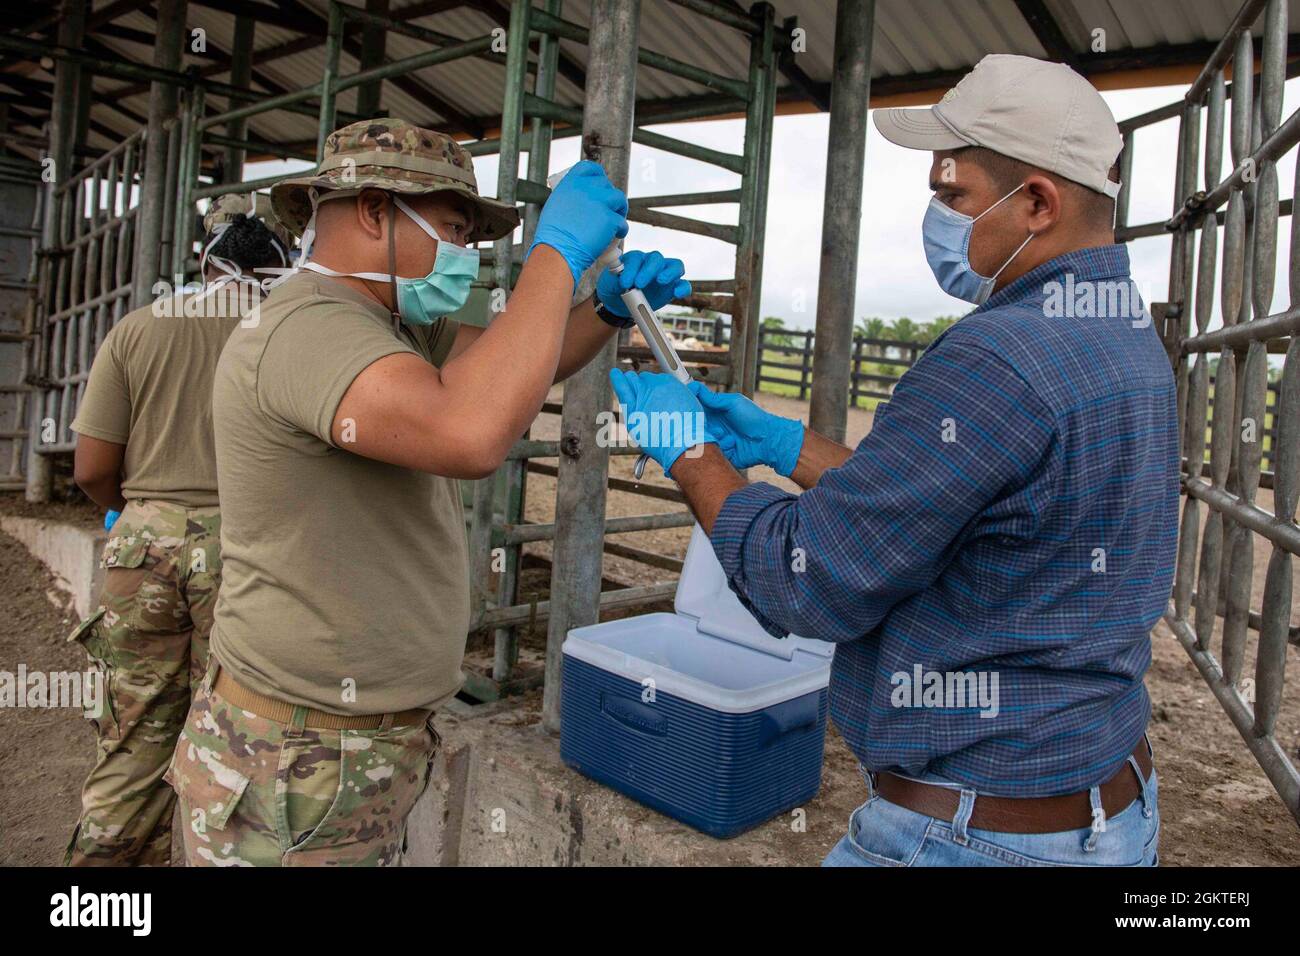 U.S. Army Staff Sgt. Rene Aventura, a field veterinary service technician with the 109th Medical Detachment Veterinary Services out of Garden Grove, Calif., helps local veterinarian, Set Samayoa, prepare vaccines for cattle during Resolute Sentinel 21 in Melchor De Mencos, Guatemala, June 29, 2021. U.S. military professionals will work alongside the Guatemalan ministry of Agriculture personnel to offer large animal care education and vaccinations at various locations during the exercise. Stock Photo